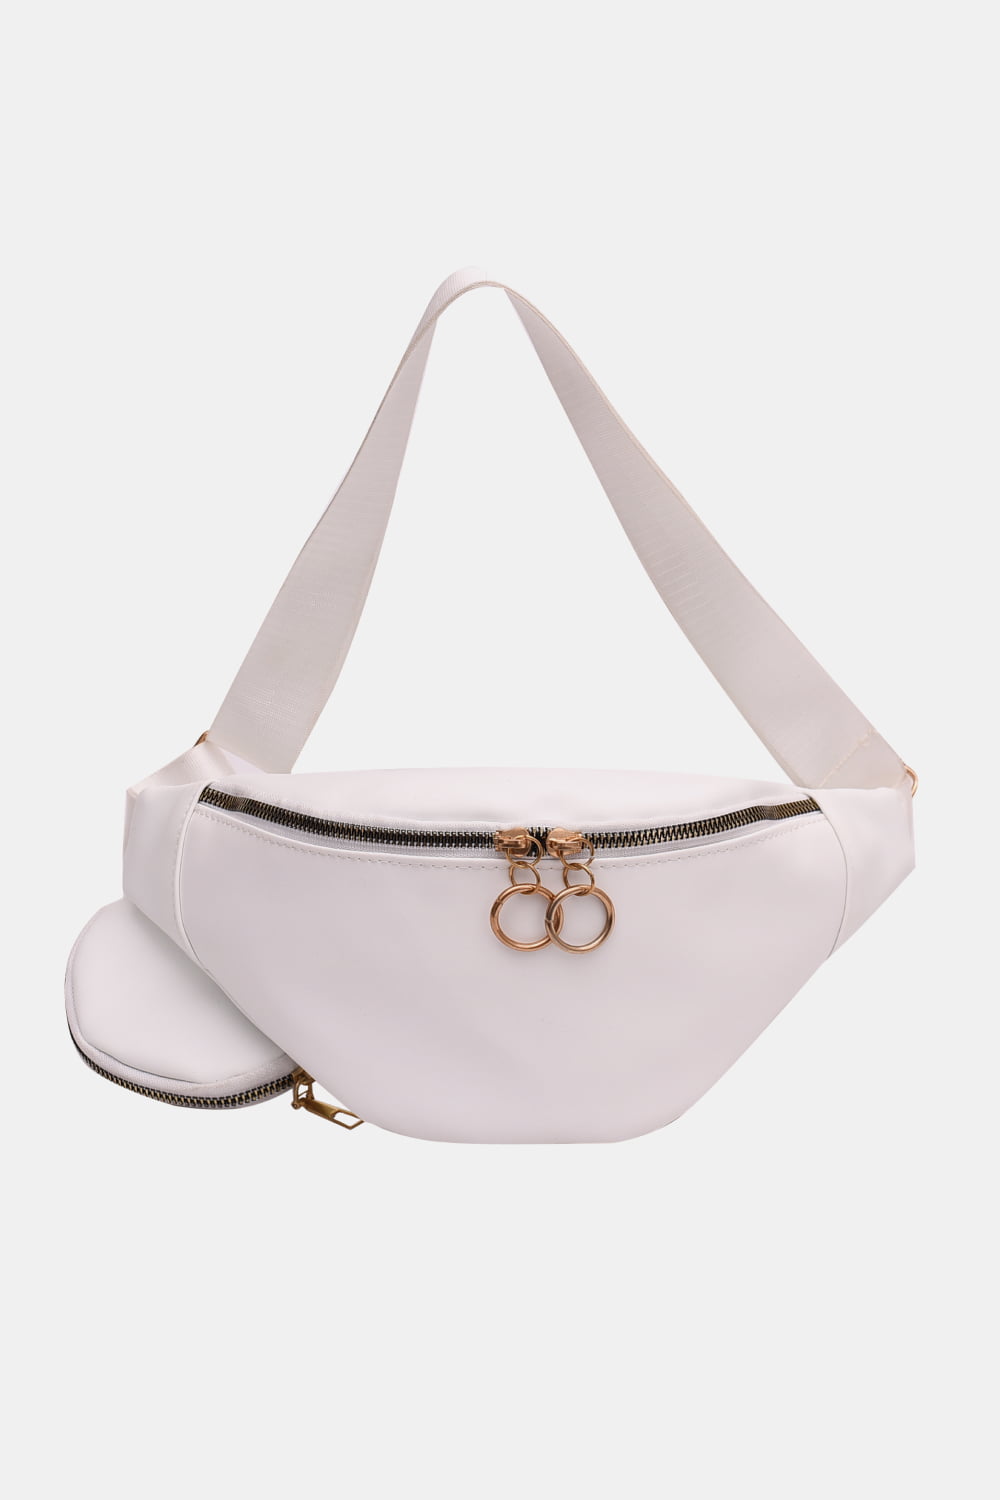 PU Leather Sling Bag with Small Purse